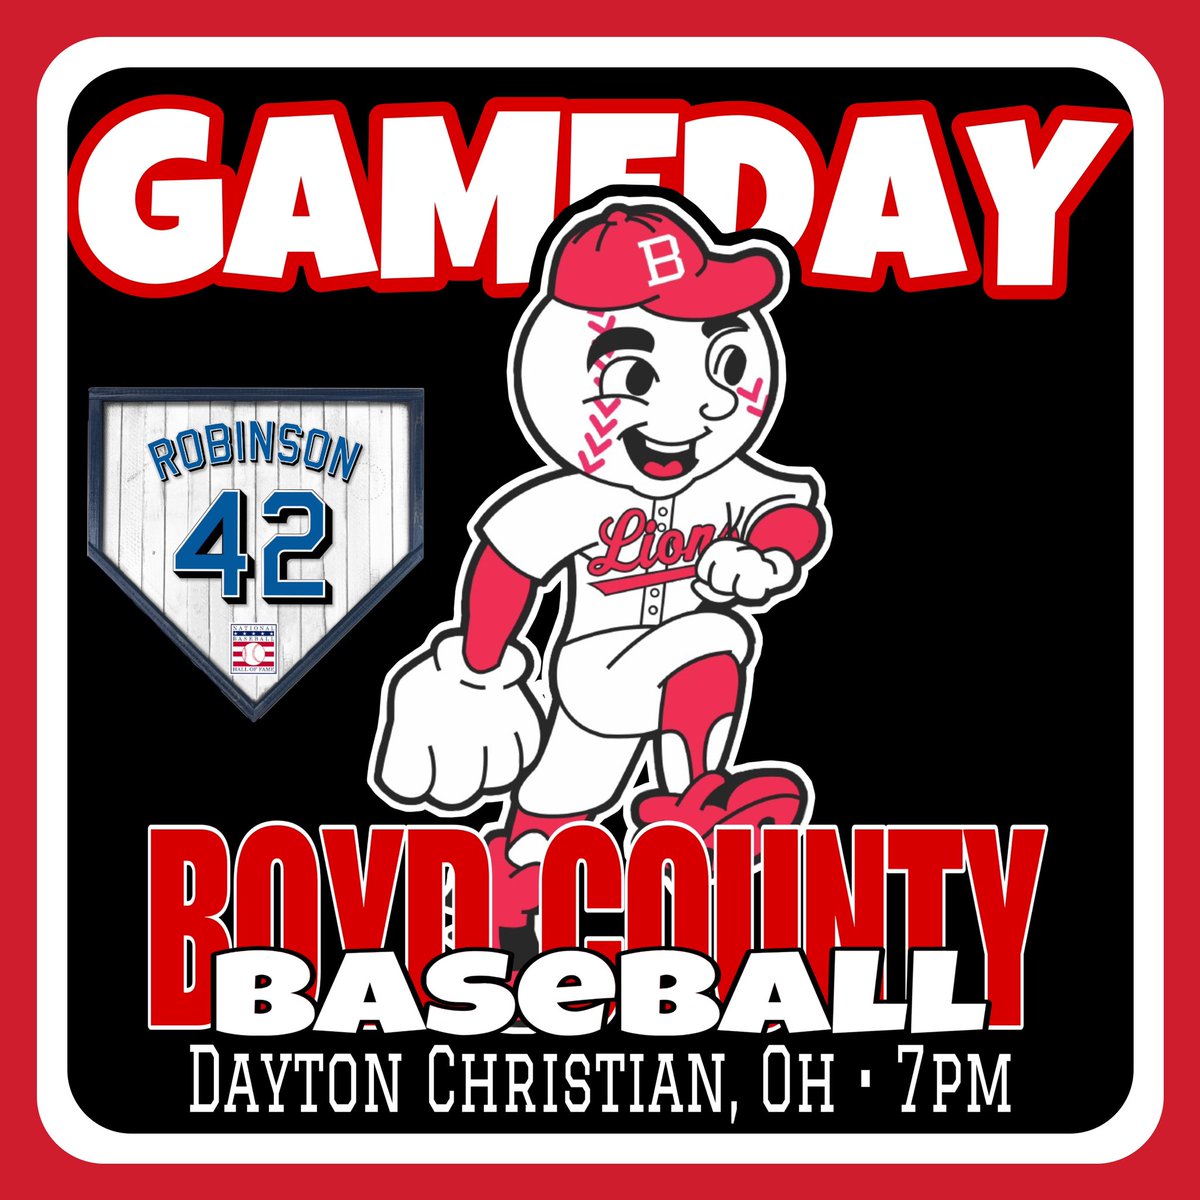 GAMEDAY: the last day for the #CountyBoys to compete in Florida they will face off against Dayton Christian from Ohio at 7pm. Link to watch the game is below. youtube.com/live/o1bcL_UGJ…